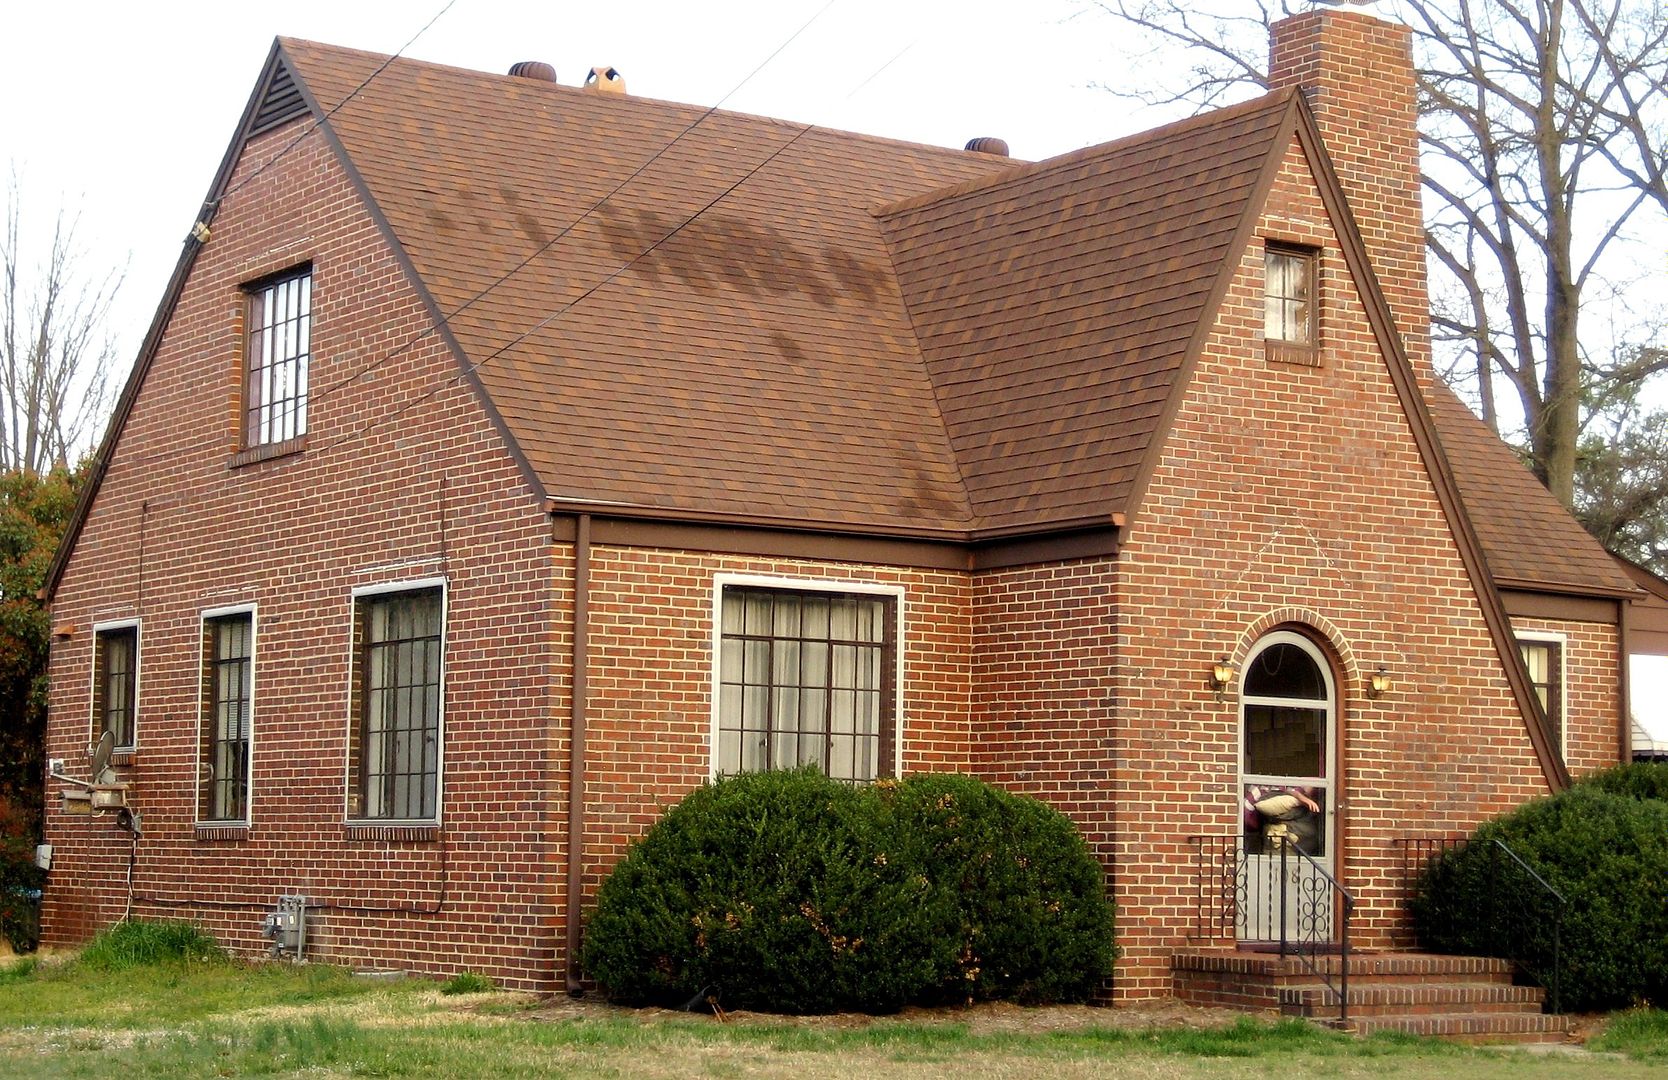 Heres the lovely brick NON-SEARS HOUSE in Hopewell. 